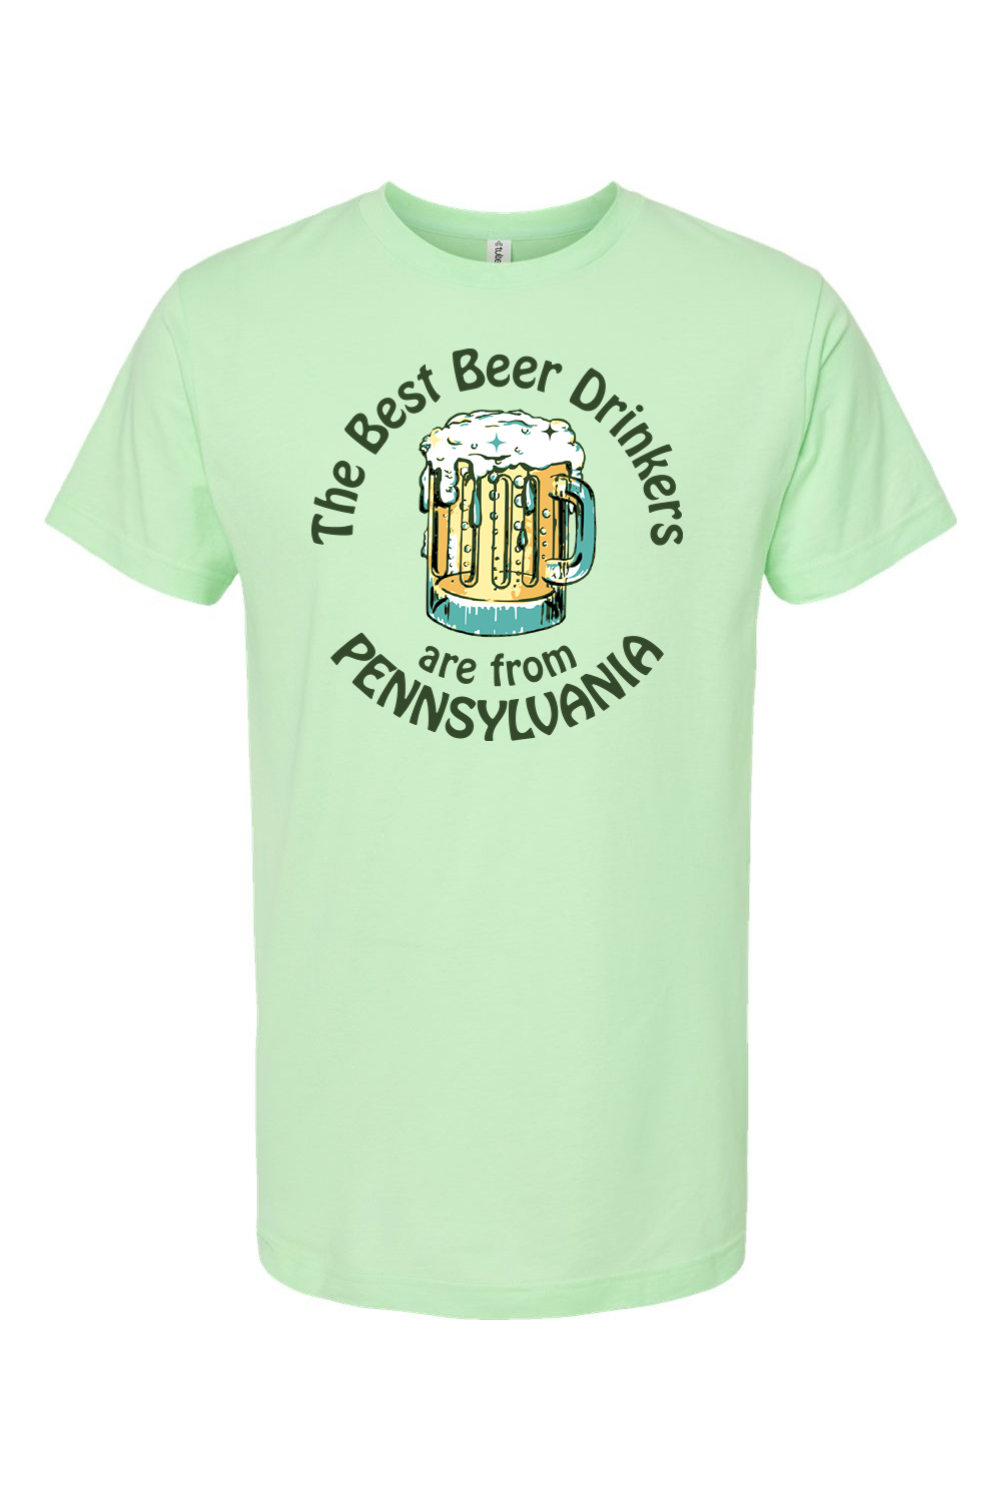 The Best Beer Drinkers are from Pennsylvania - Yinzylvania